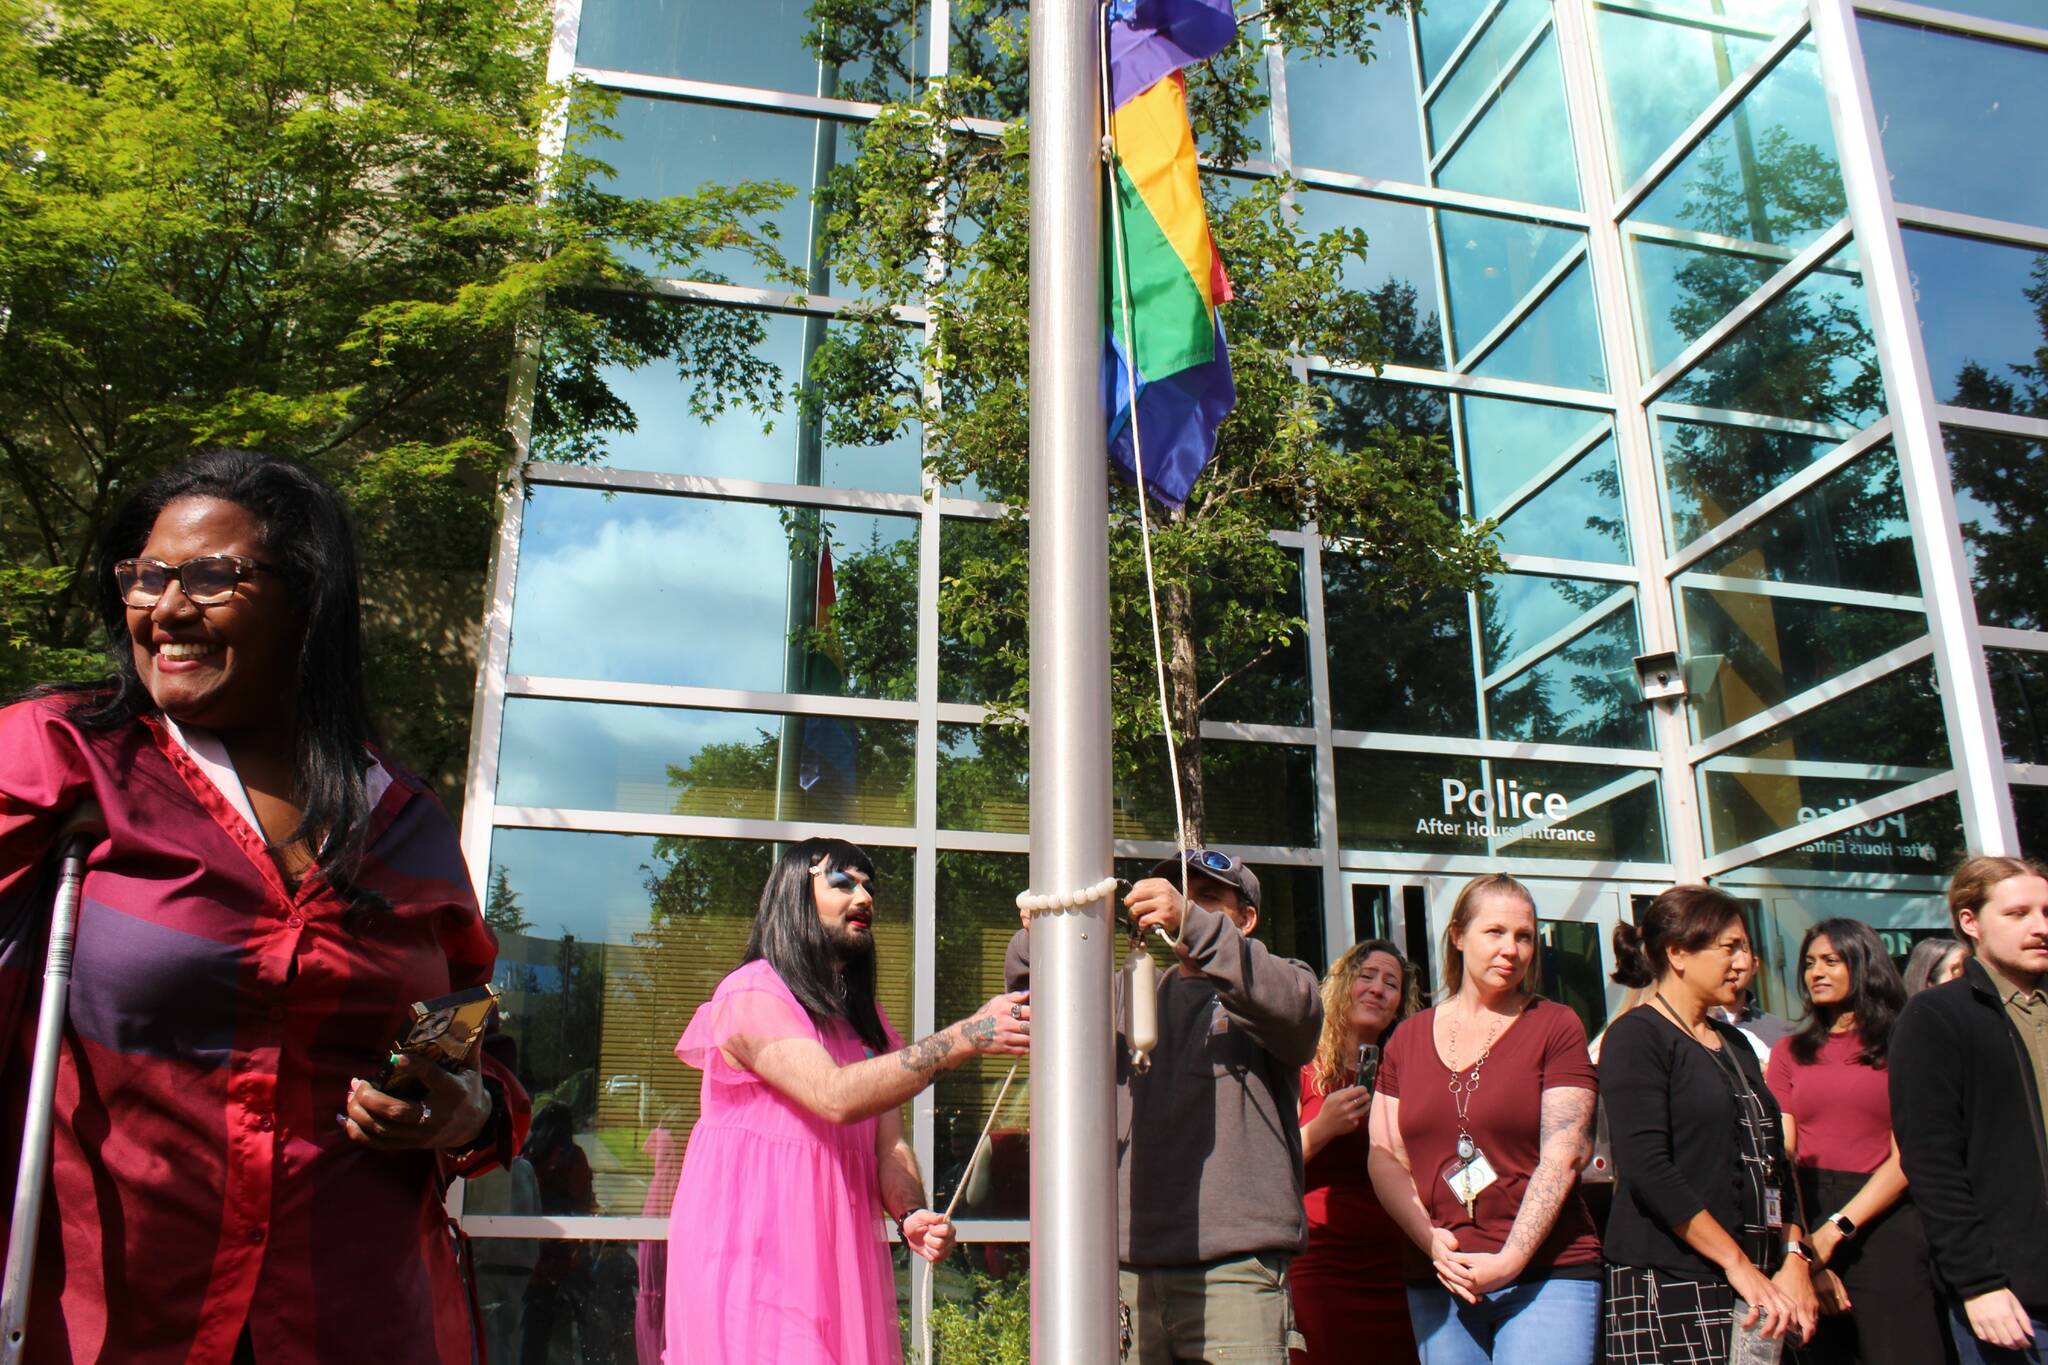 Drag queen Nemesis helps raise the pride flag June 1 at Federal Way City Hall. Alex Bruell / The Mirror